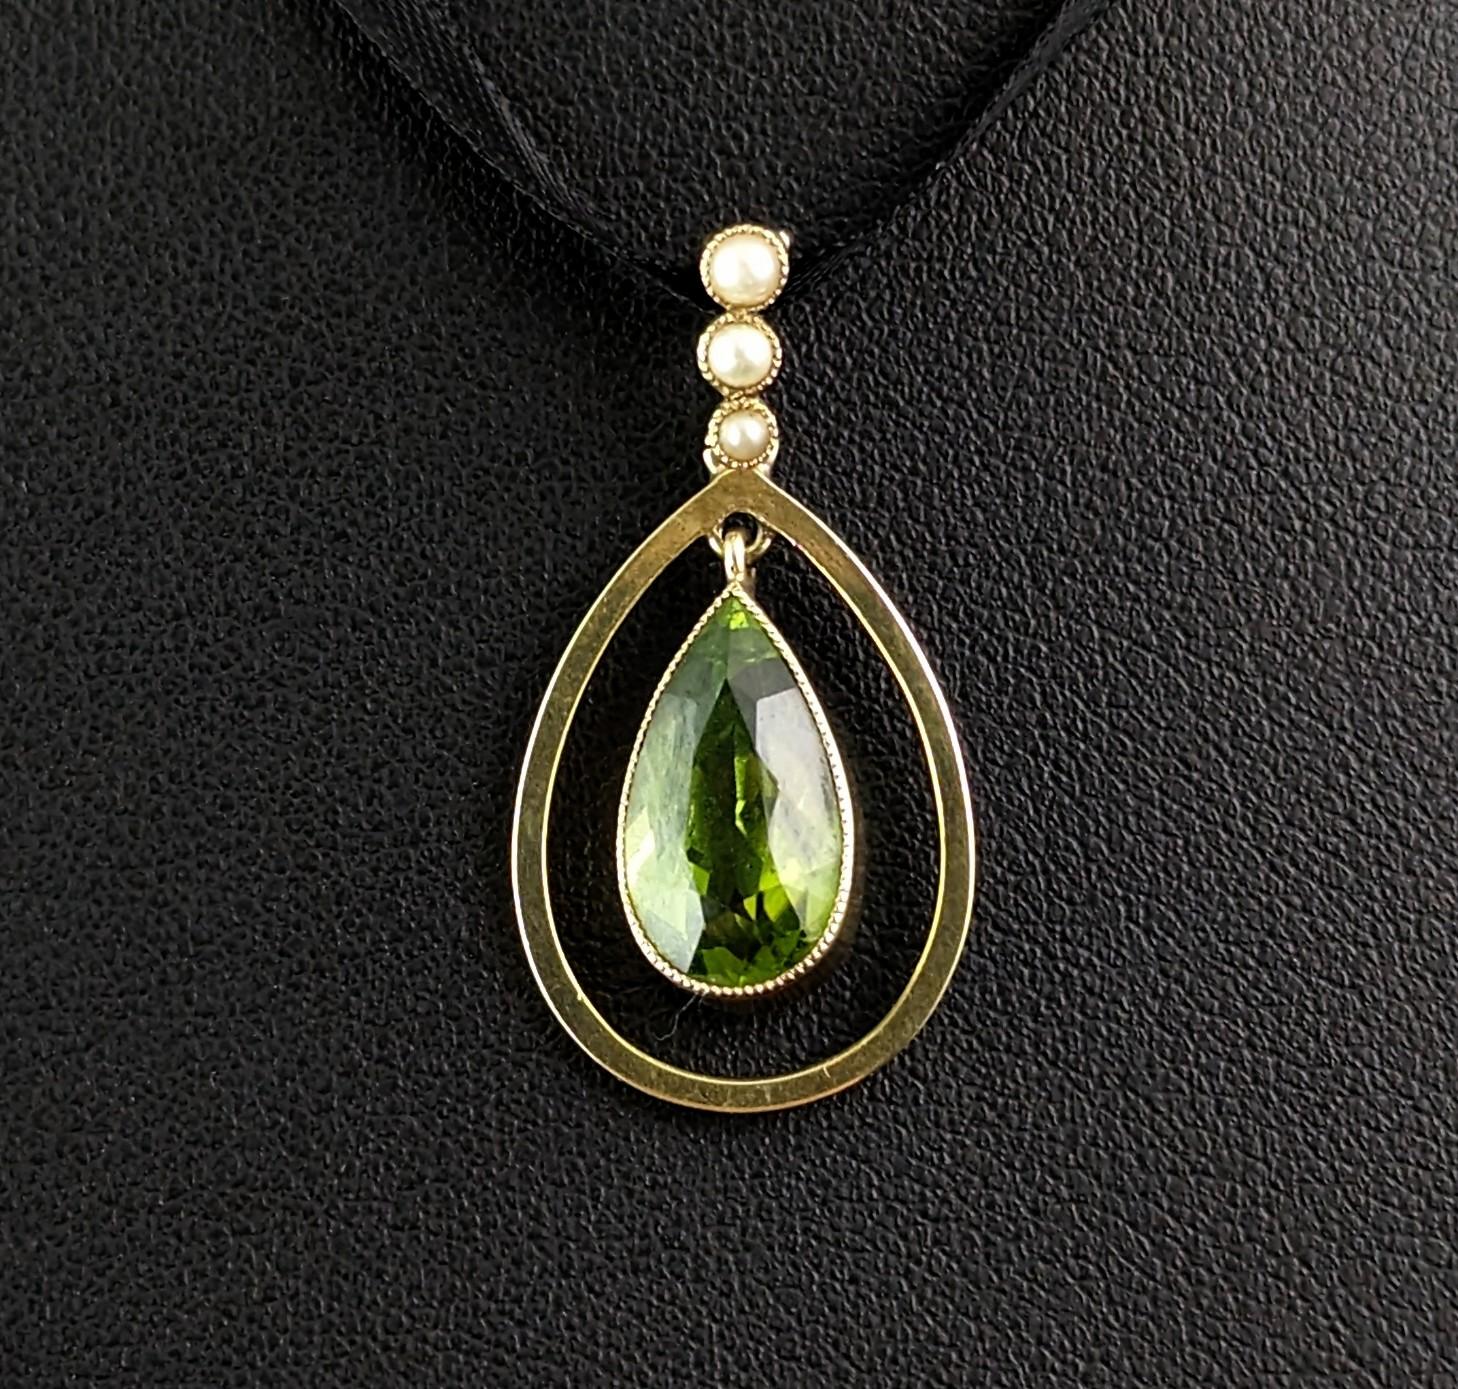 Antique Peridot and seed pearl pendant, 9k gold, Art Nouveau  2